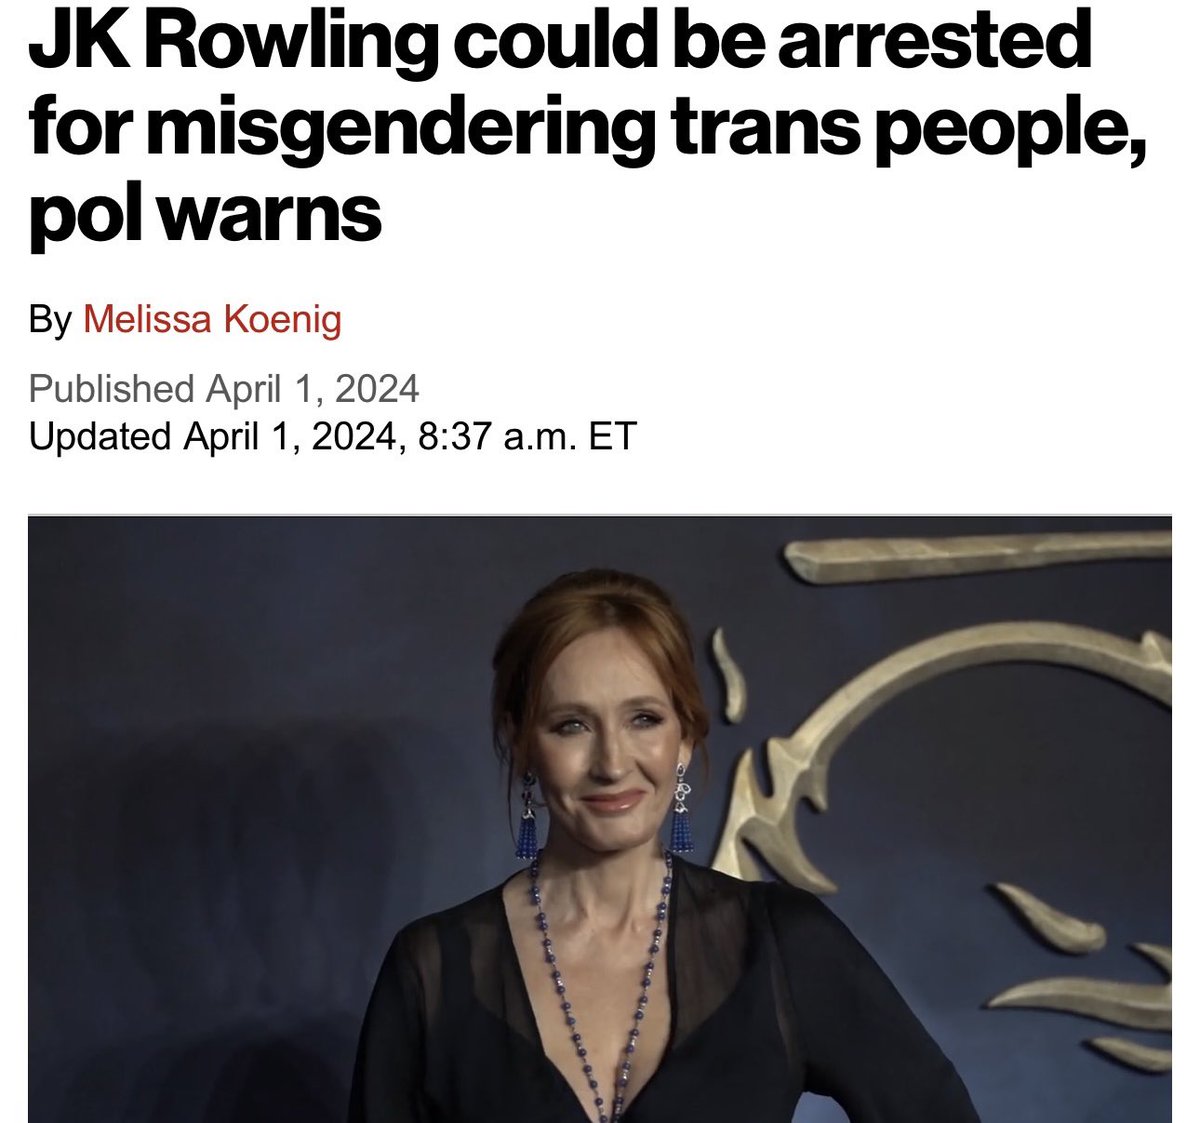 “JK Rowling could be arrested in Scotland for making a series of posts misgendering transgender women, under a newly-enacted hate crime law, a politician in the UK has warned.” The trans stuff is concerning for two major reasons: 1) Targeting of children 2) Free Speech…